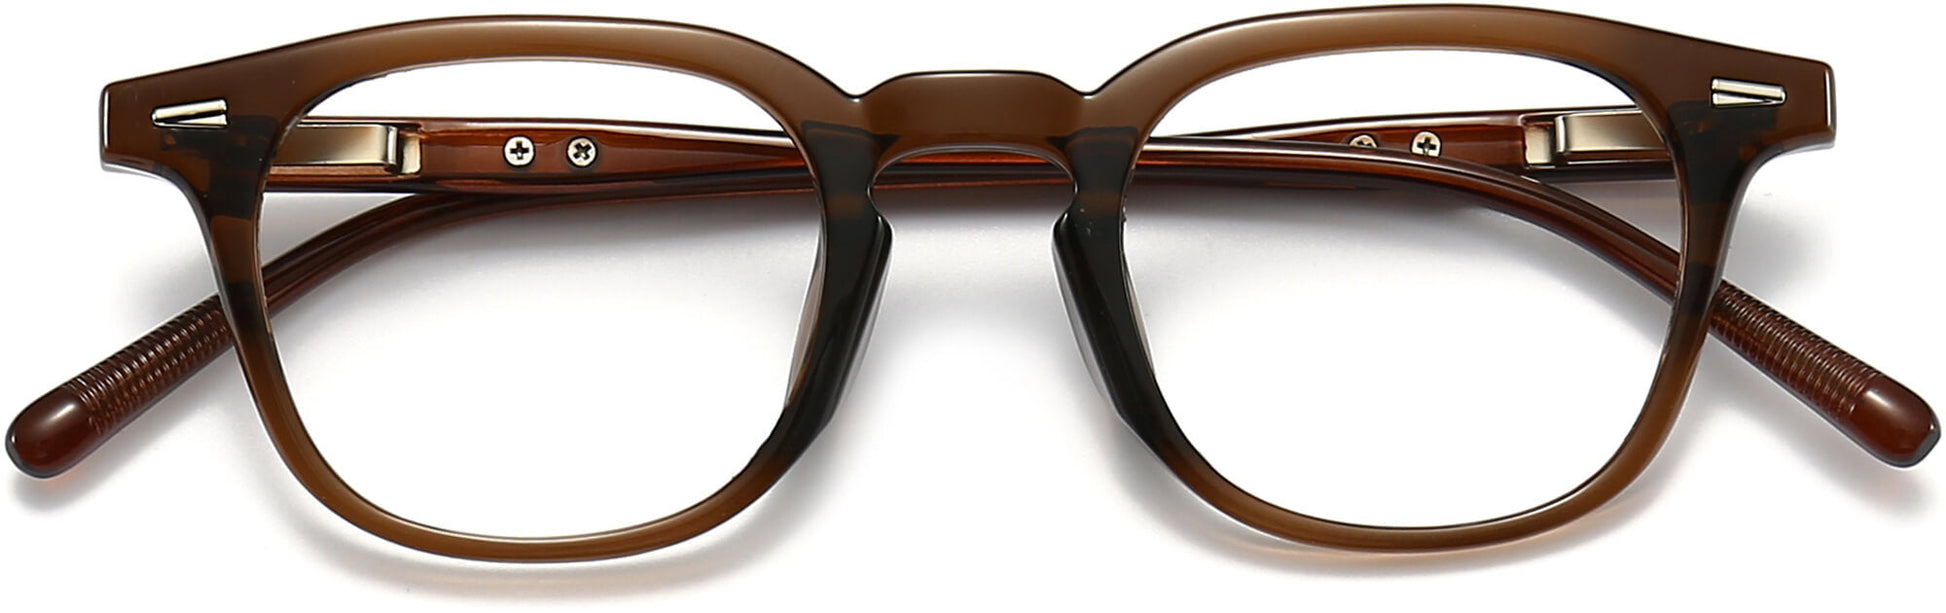 Clay Round Green Eyeglasses from ANRRI, closed view